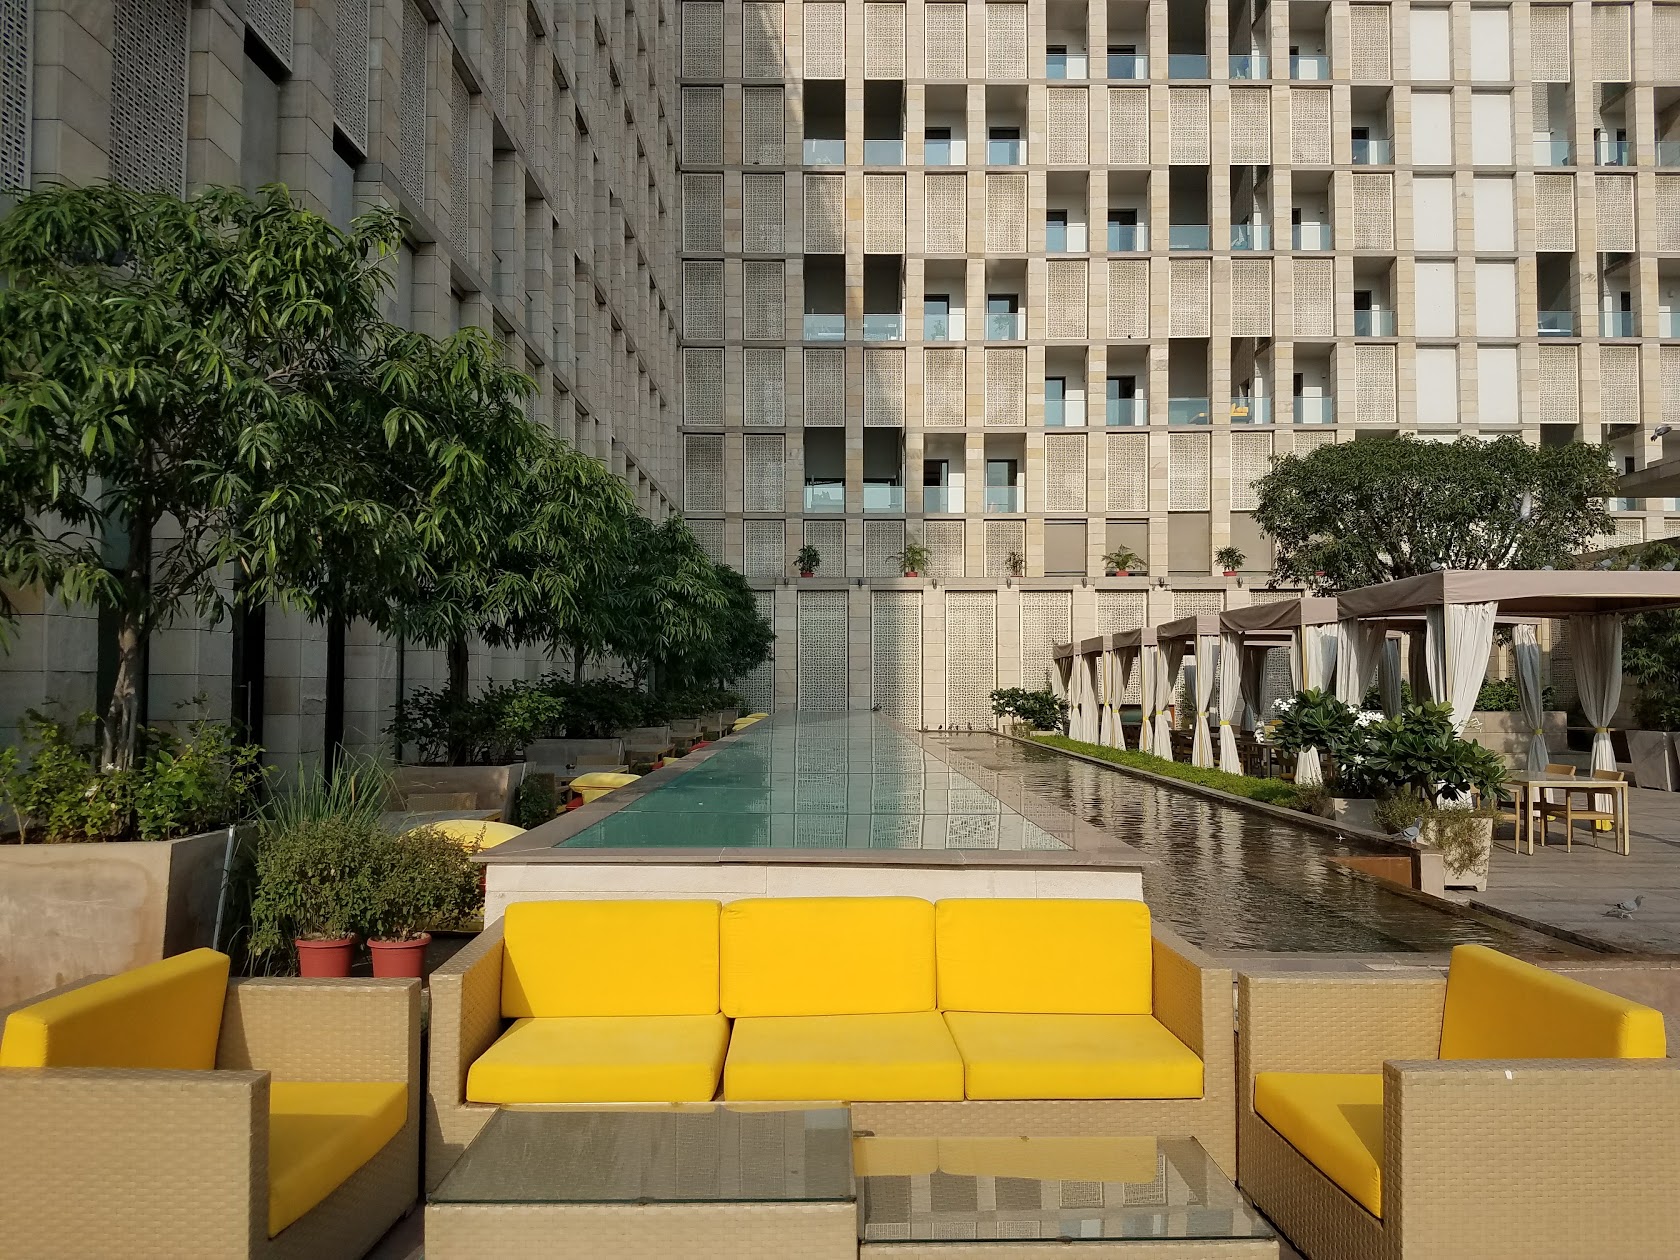 I just checked into The Lodhi in New Delhi, and I'm thinking of moving in